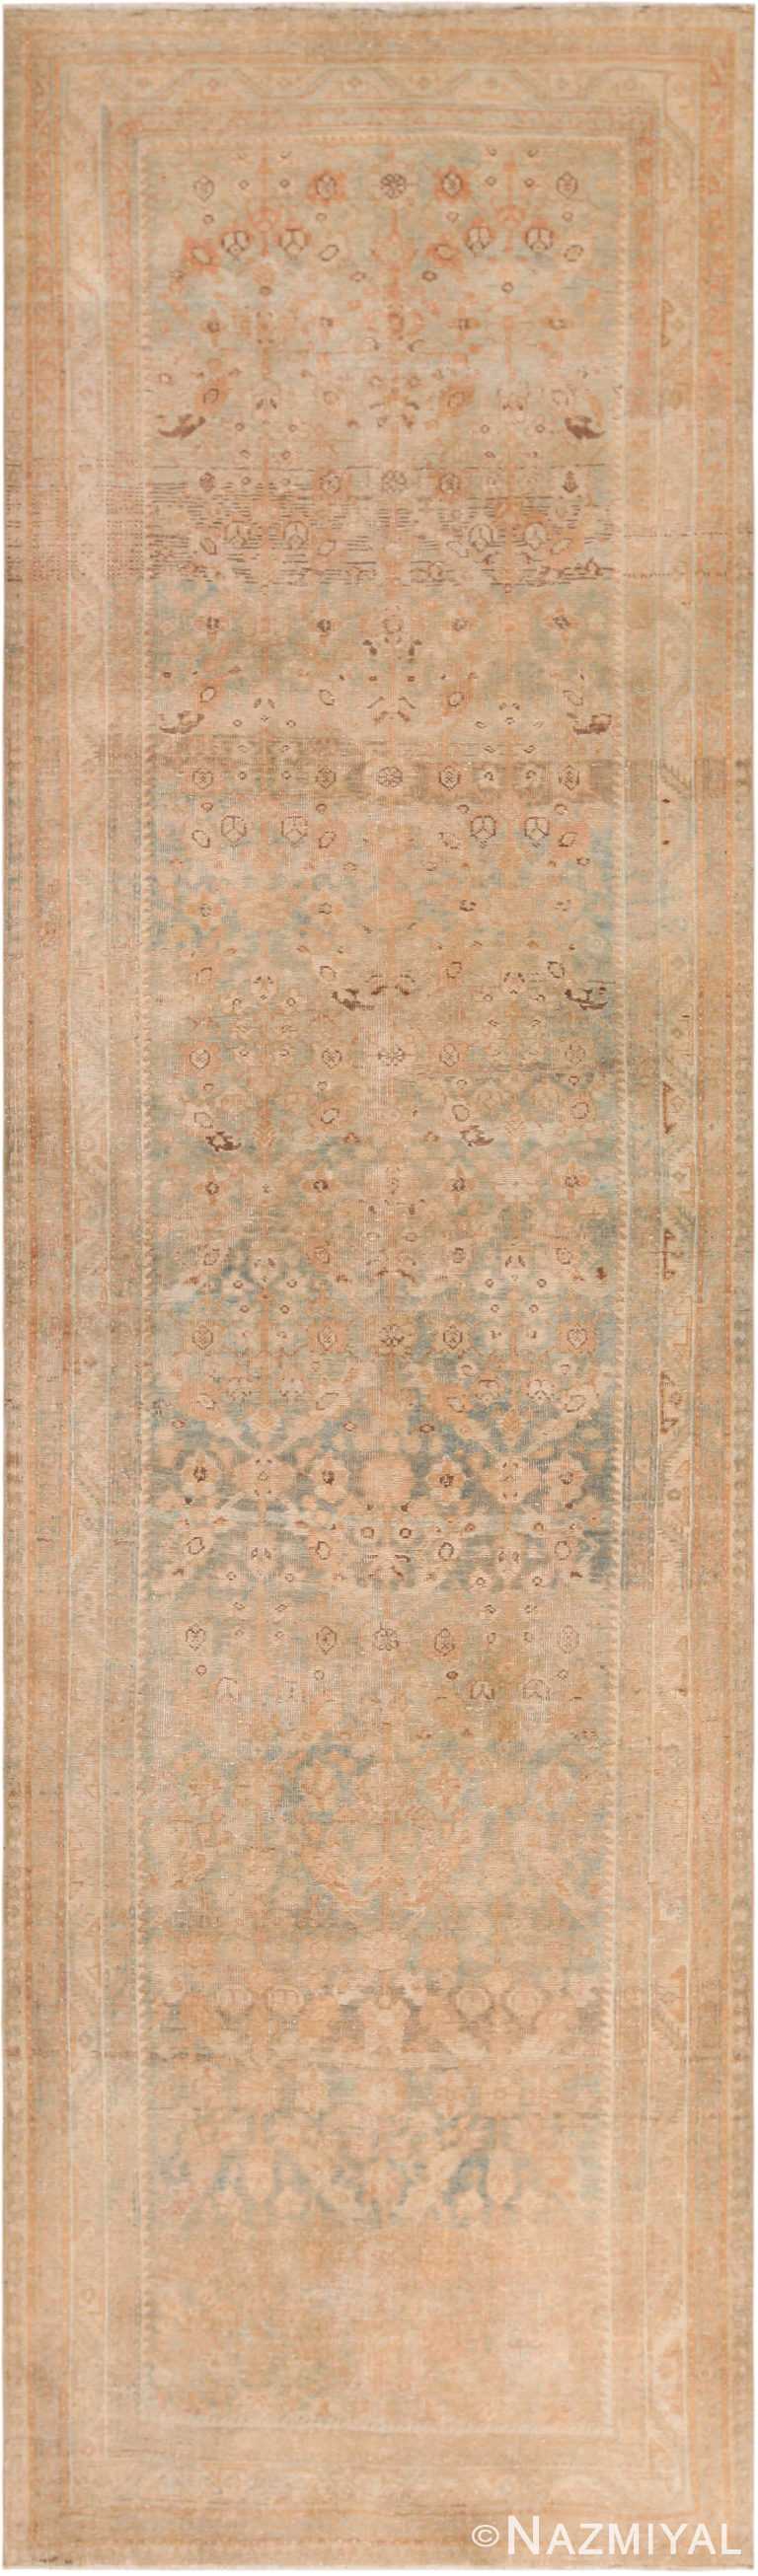 Antique Persian Malayer Runner Rug 72047 by Nazmiyal Antique Rugs